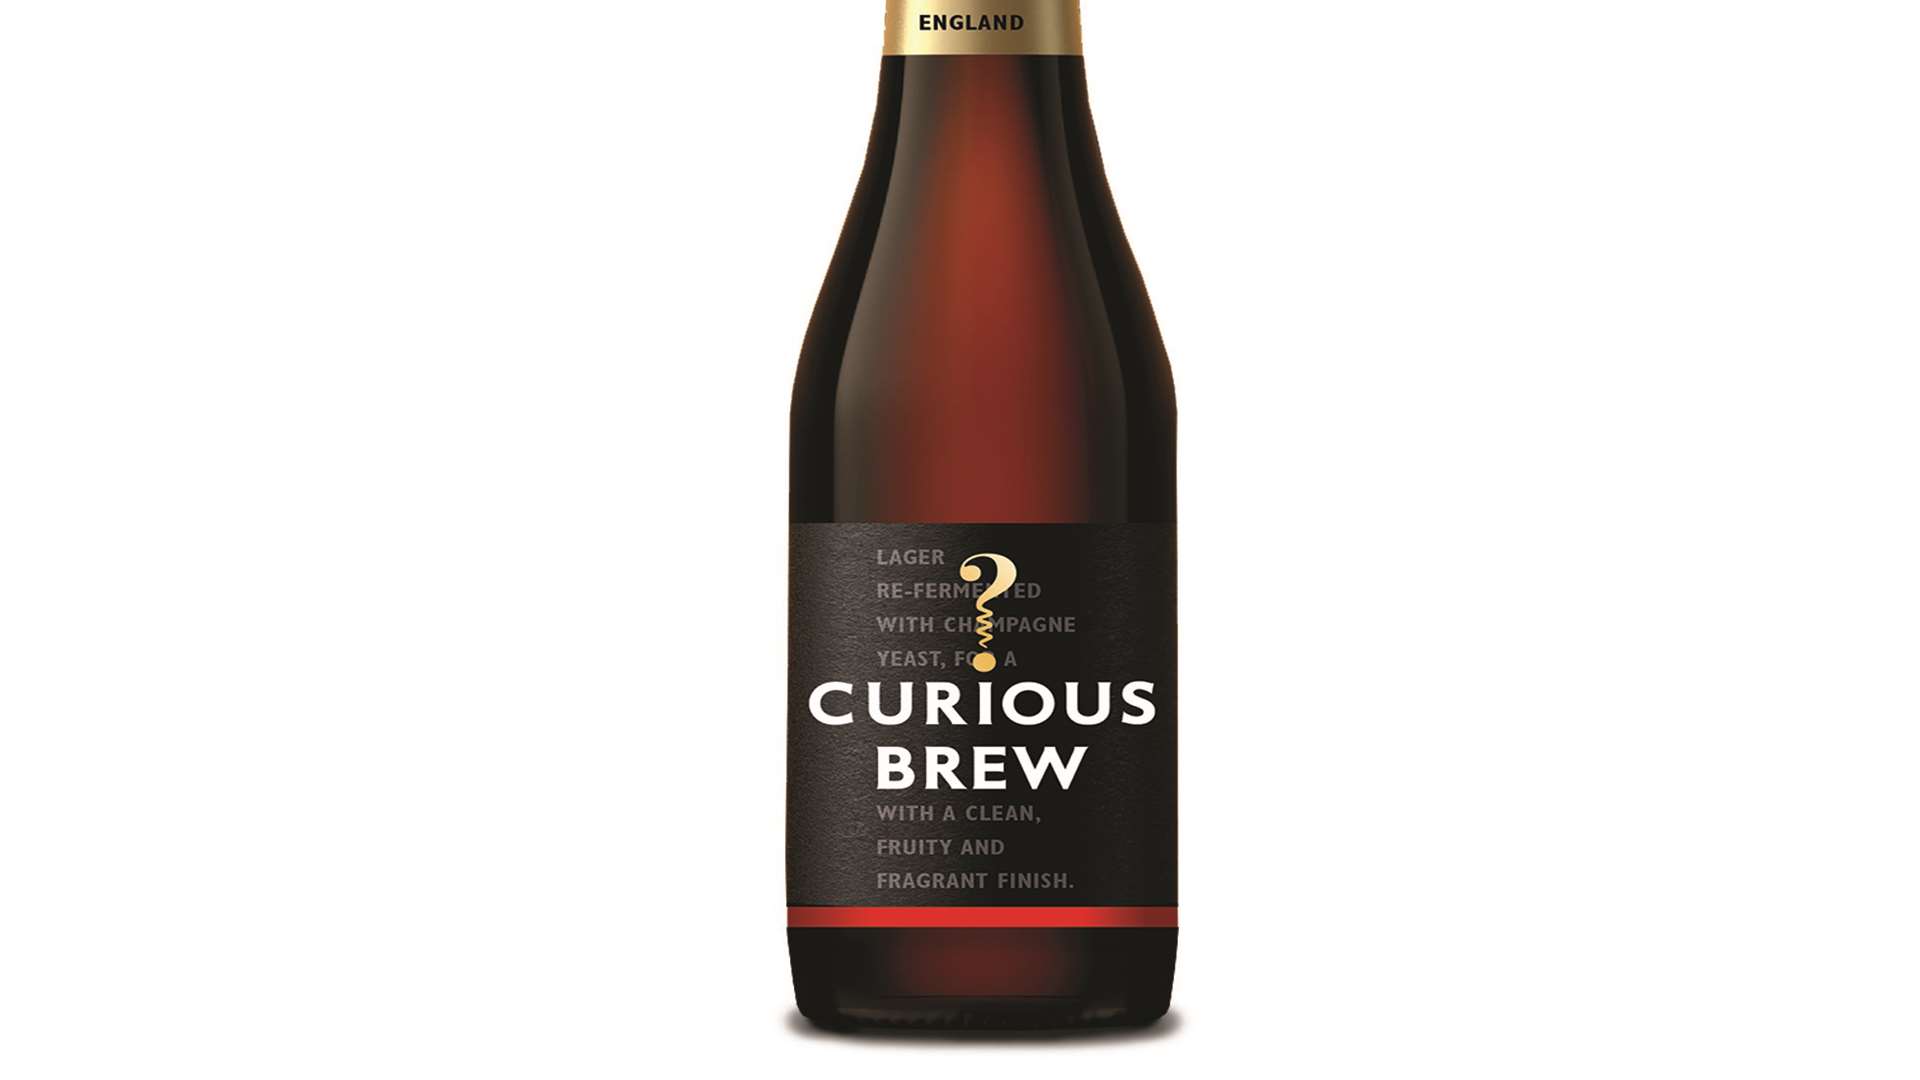 Curious Brew has been rebranded